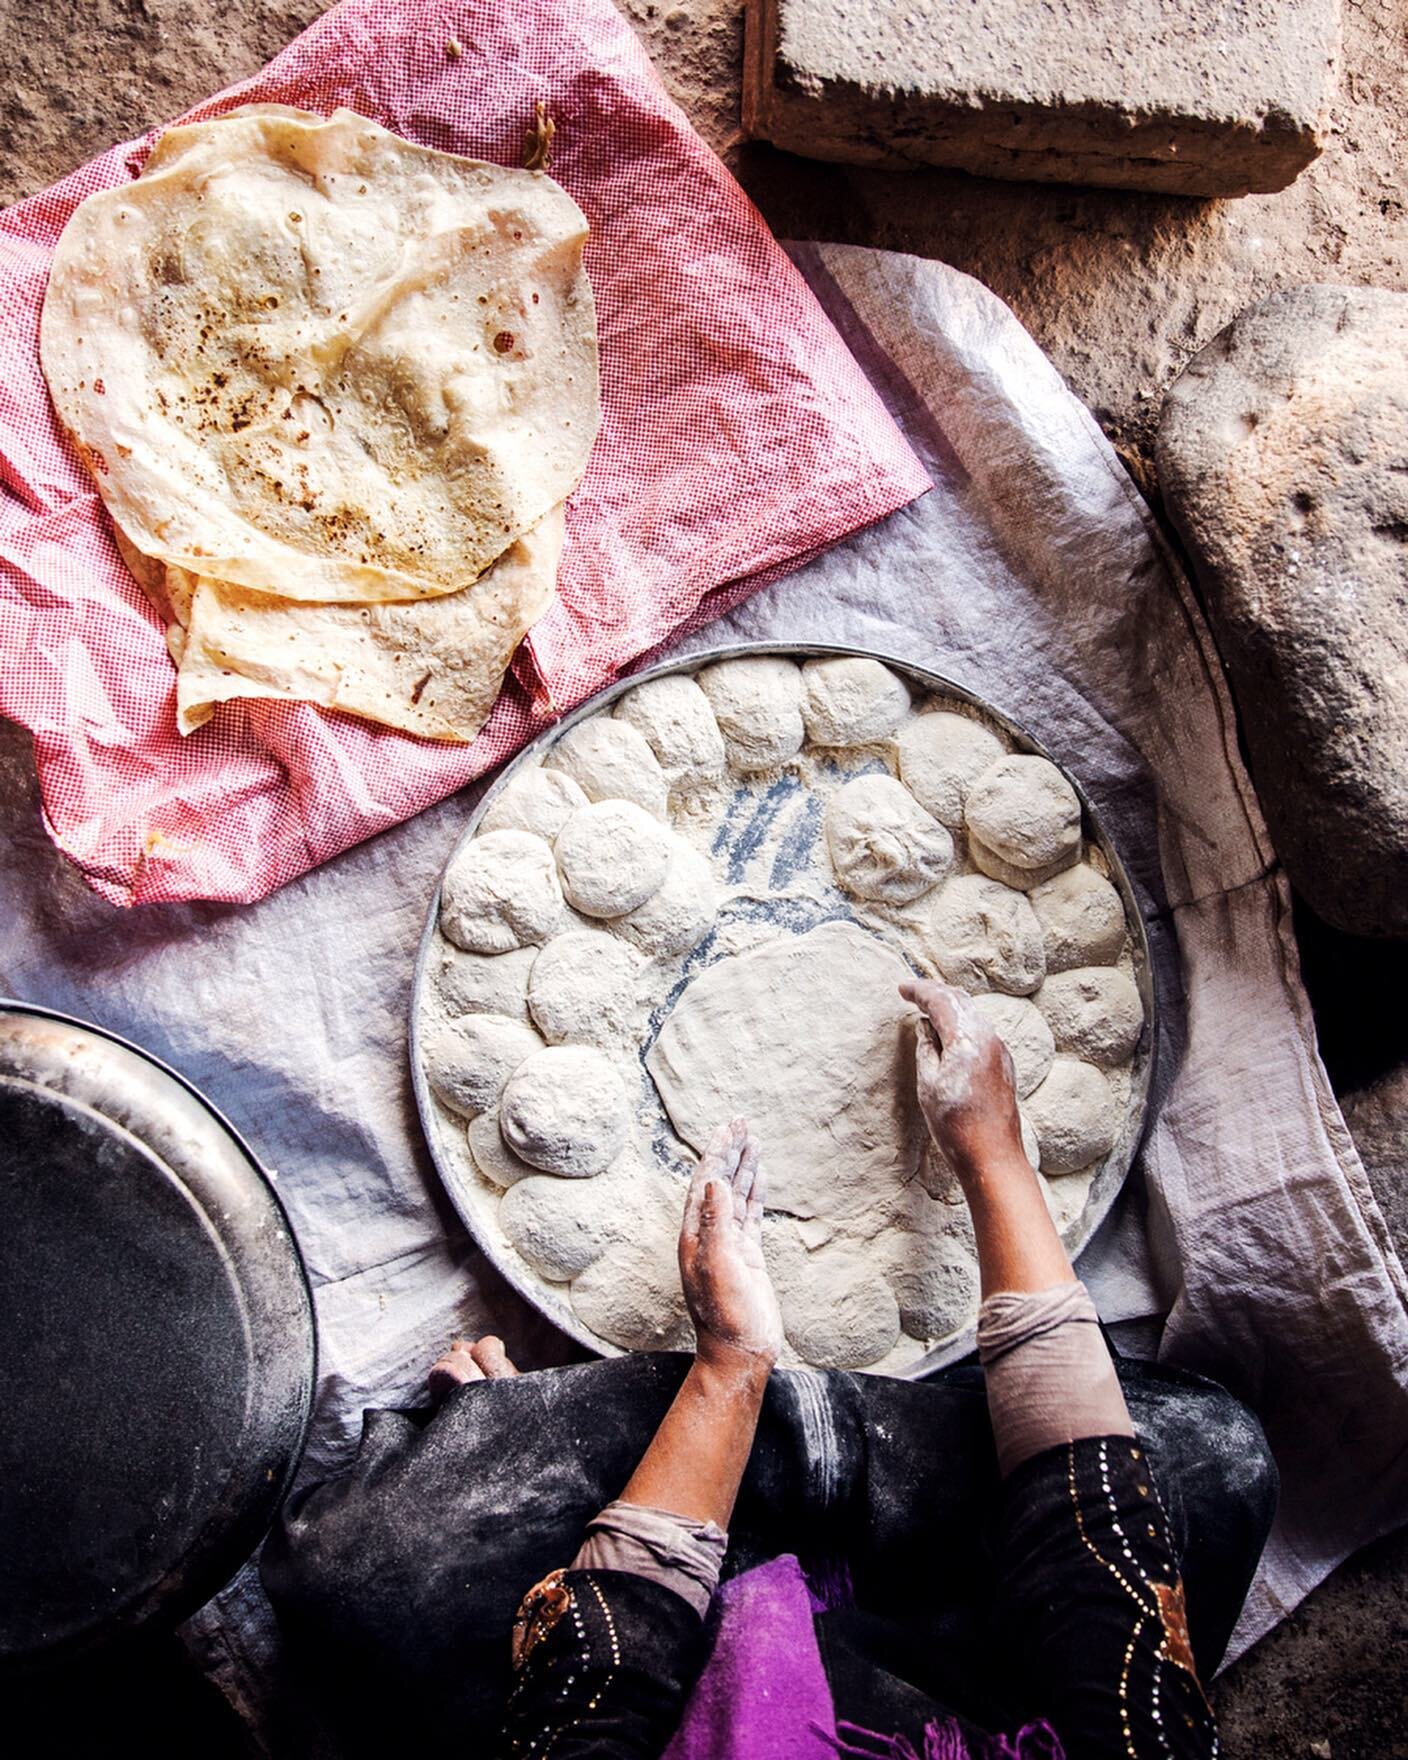 Revisited some archives of memorable meals I&rsquo;ve shared with strangers. Like baking shrak, a traditional Arabic bread with a Bedouin family in Jordan and feasting on mansaf in Wadi Rum for lunch; preparing pongala, a sweet porridge, with million